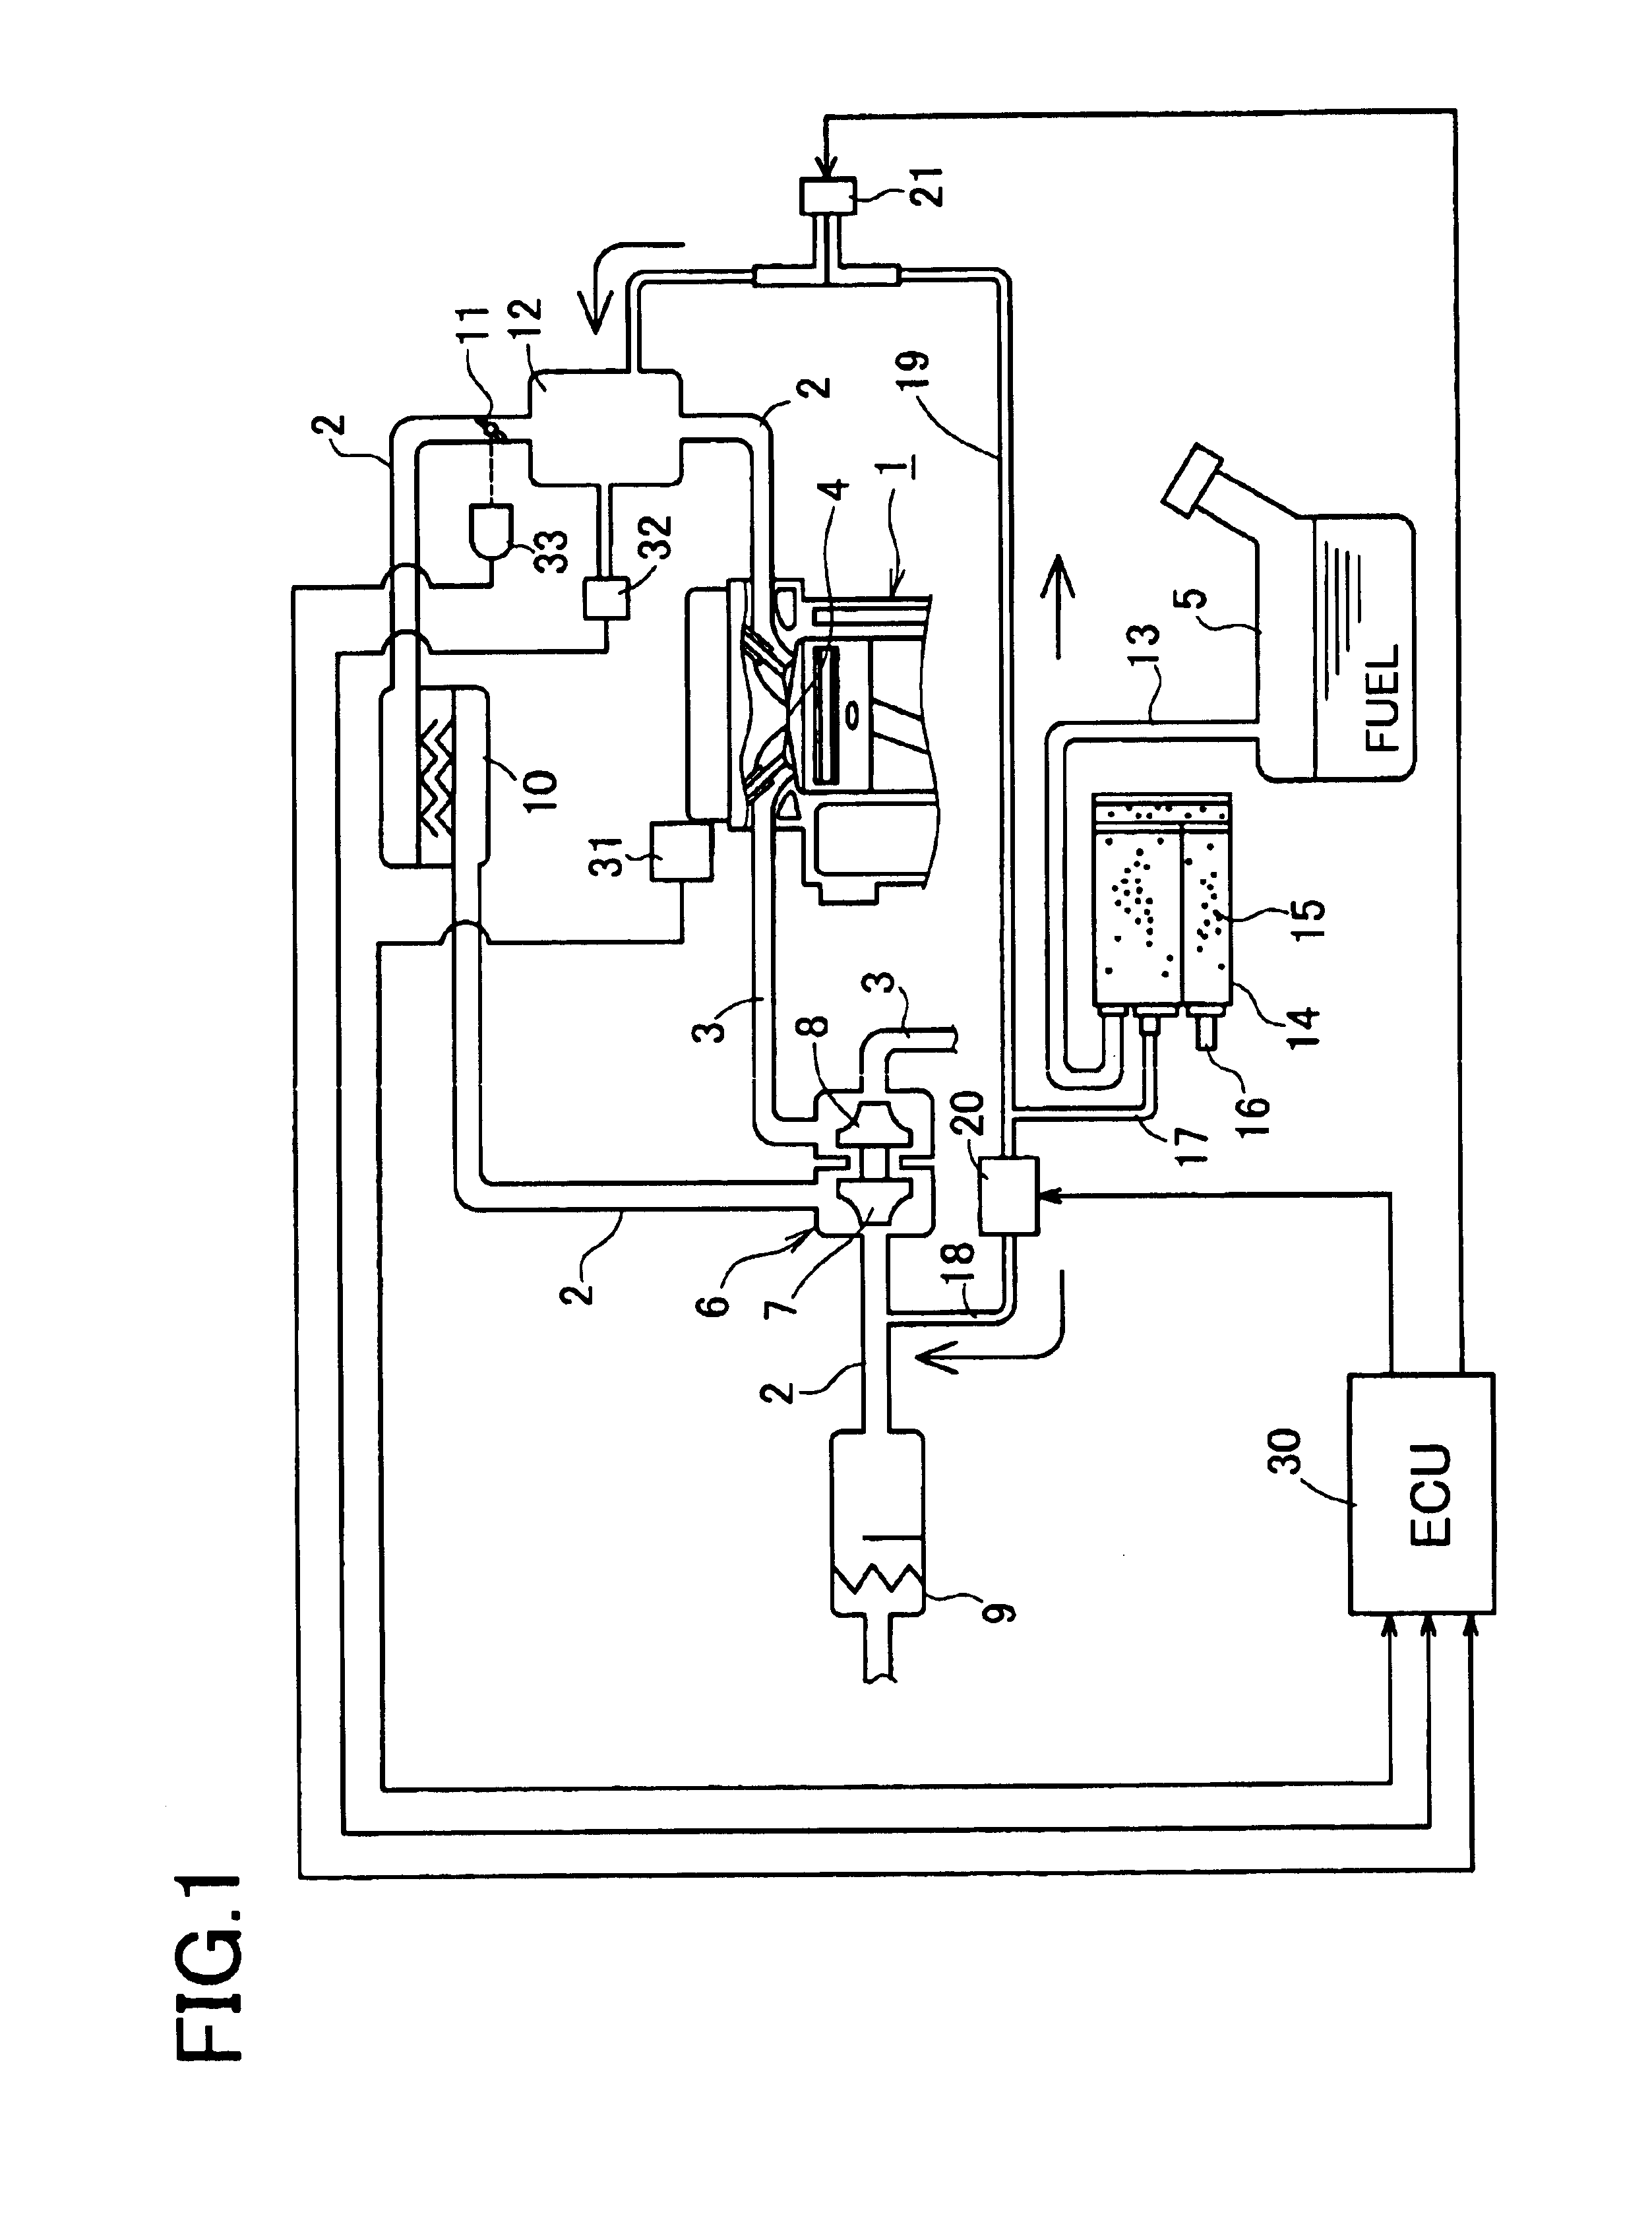 Evaporated fuel processing apparatuses for engines with supercharger